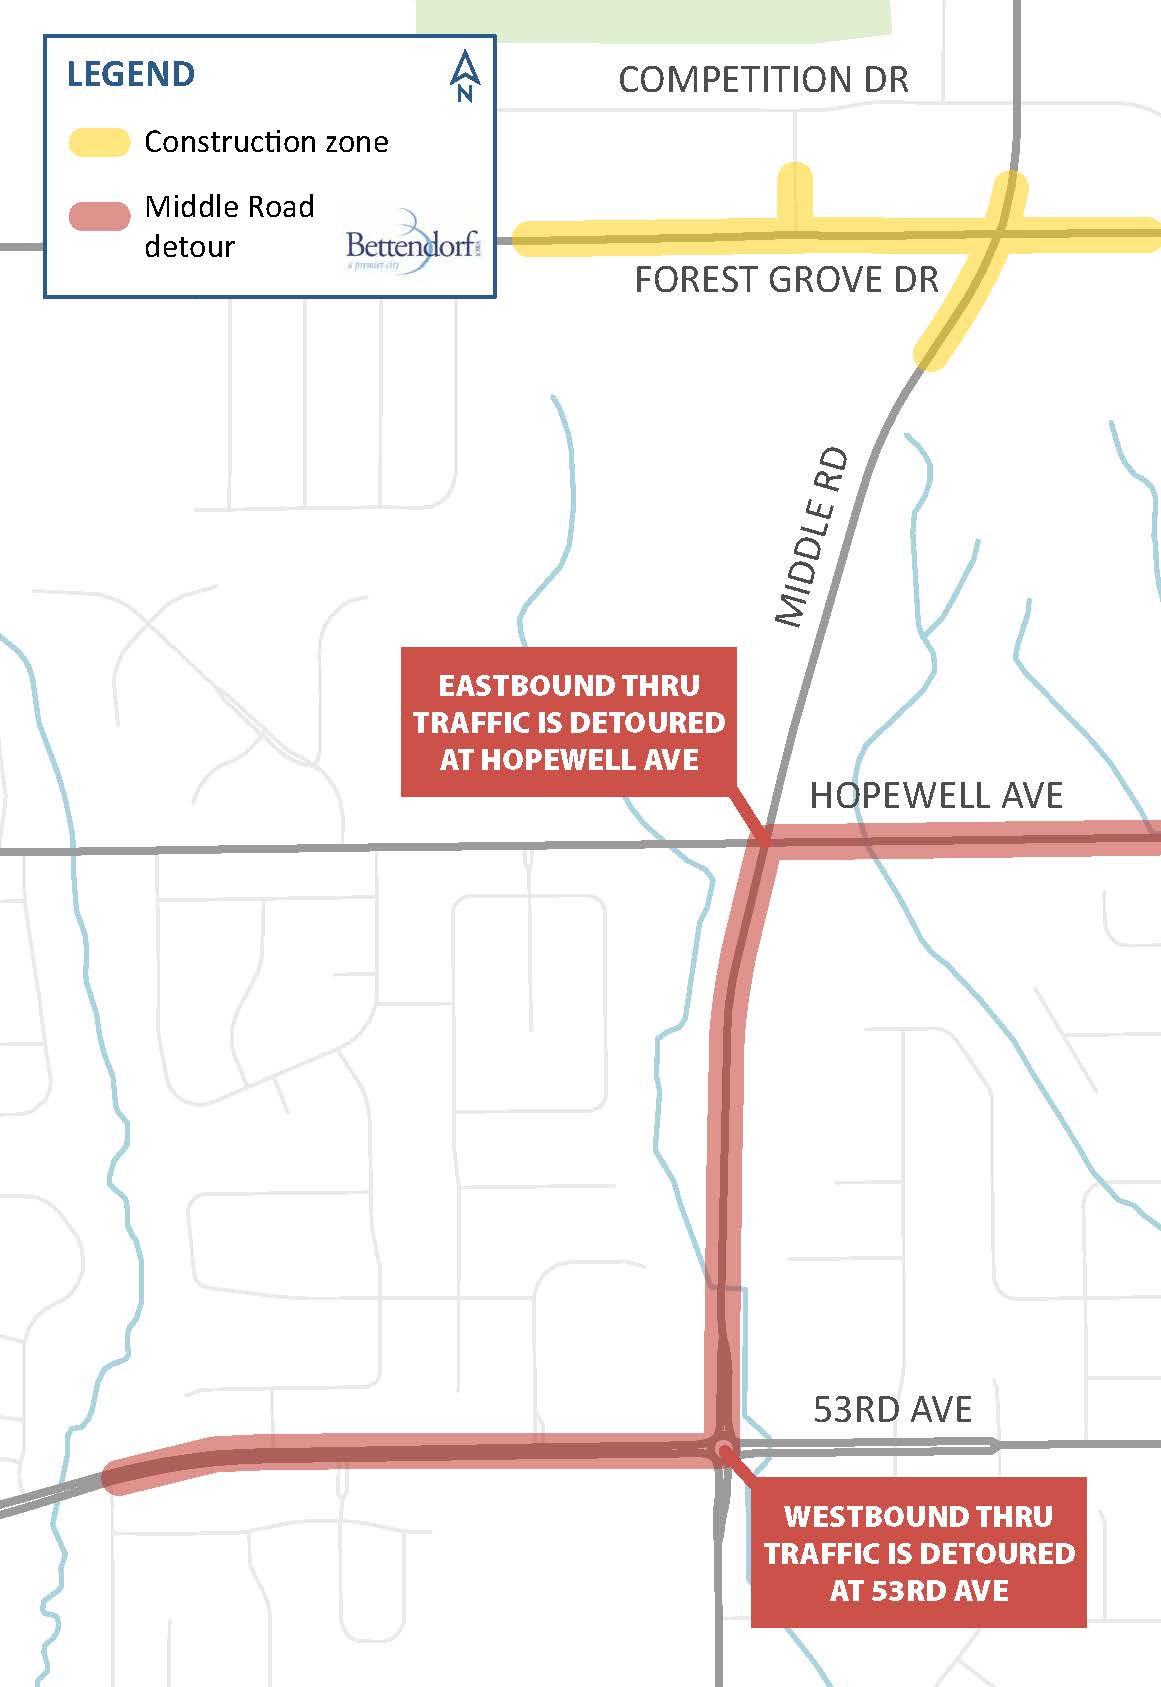 Construction zone along Forest Grove Drive, south of the Sports Complex and at the intersection of Middle Rd. Detour is Middle Rd. north of I-80, Indiana Ave, and Wells Ferry Rd.